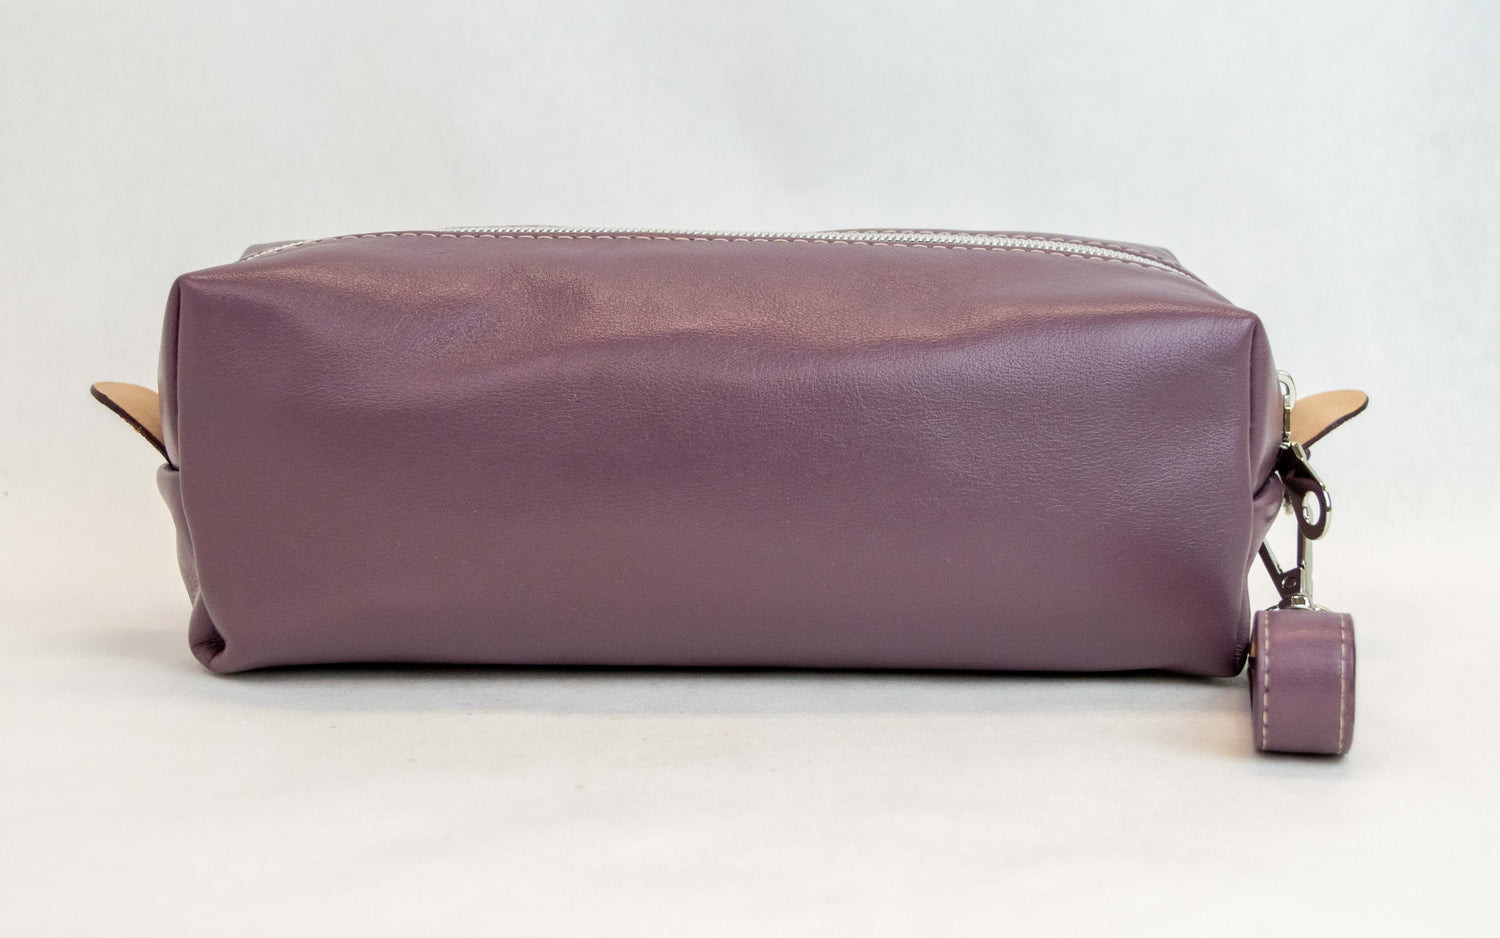 Back view of T5 bath dopp kit toiletry wash bag designer handcrafted of smooth calf leather in Lavender purple.